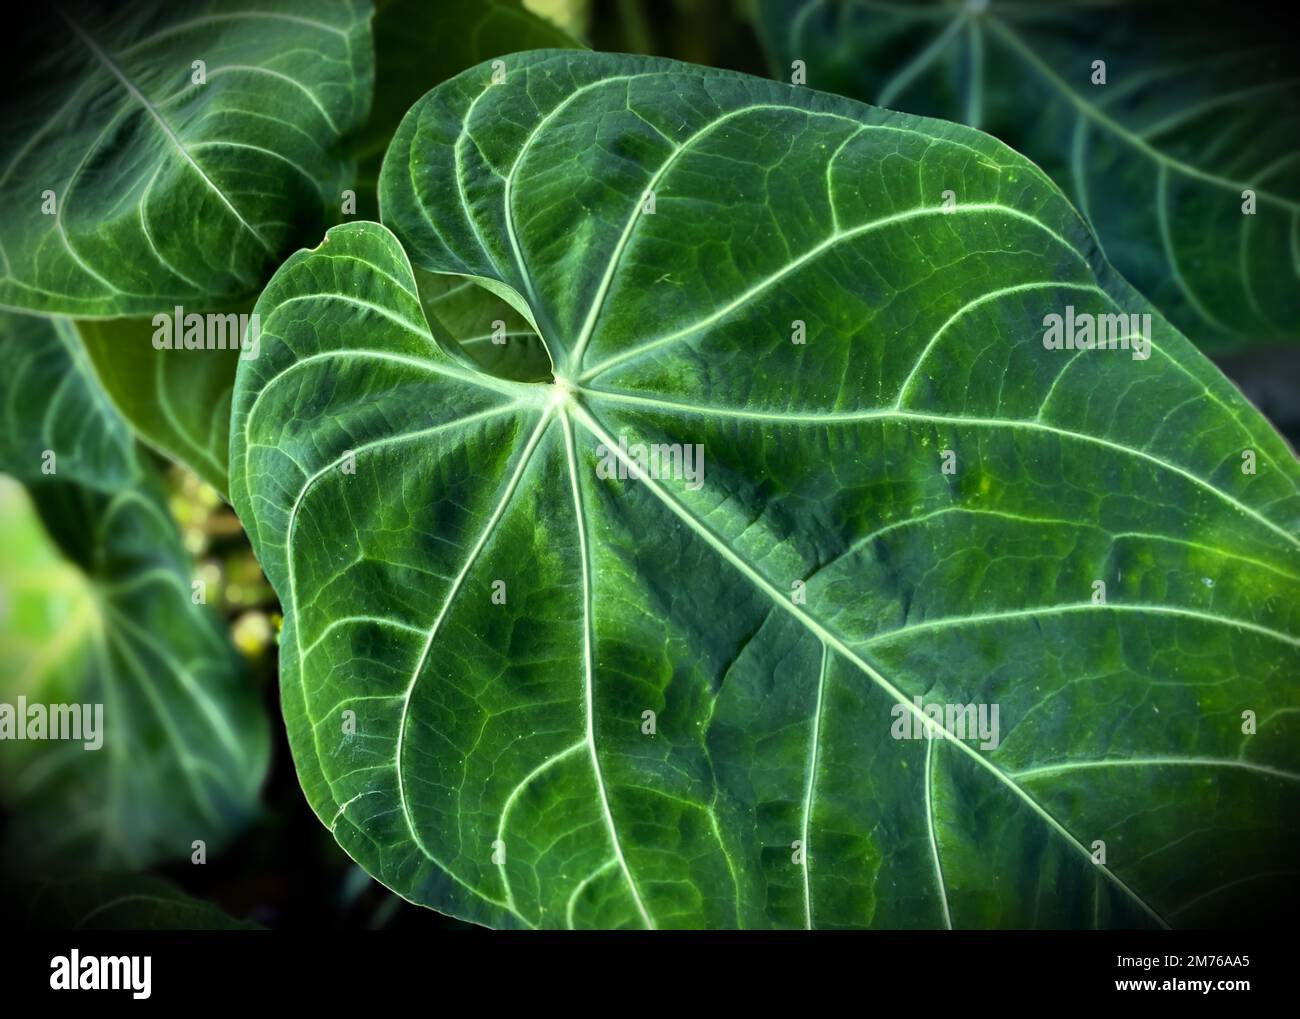 Fresh and large leaves of Anthurium crystallinum are perfect for the background. Anthurium crystallinum is a type of plant from the taro tribe, including the Araceae family. Stock Photo